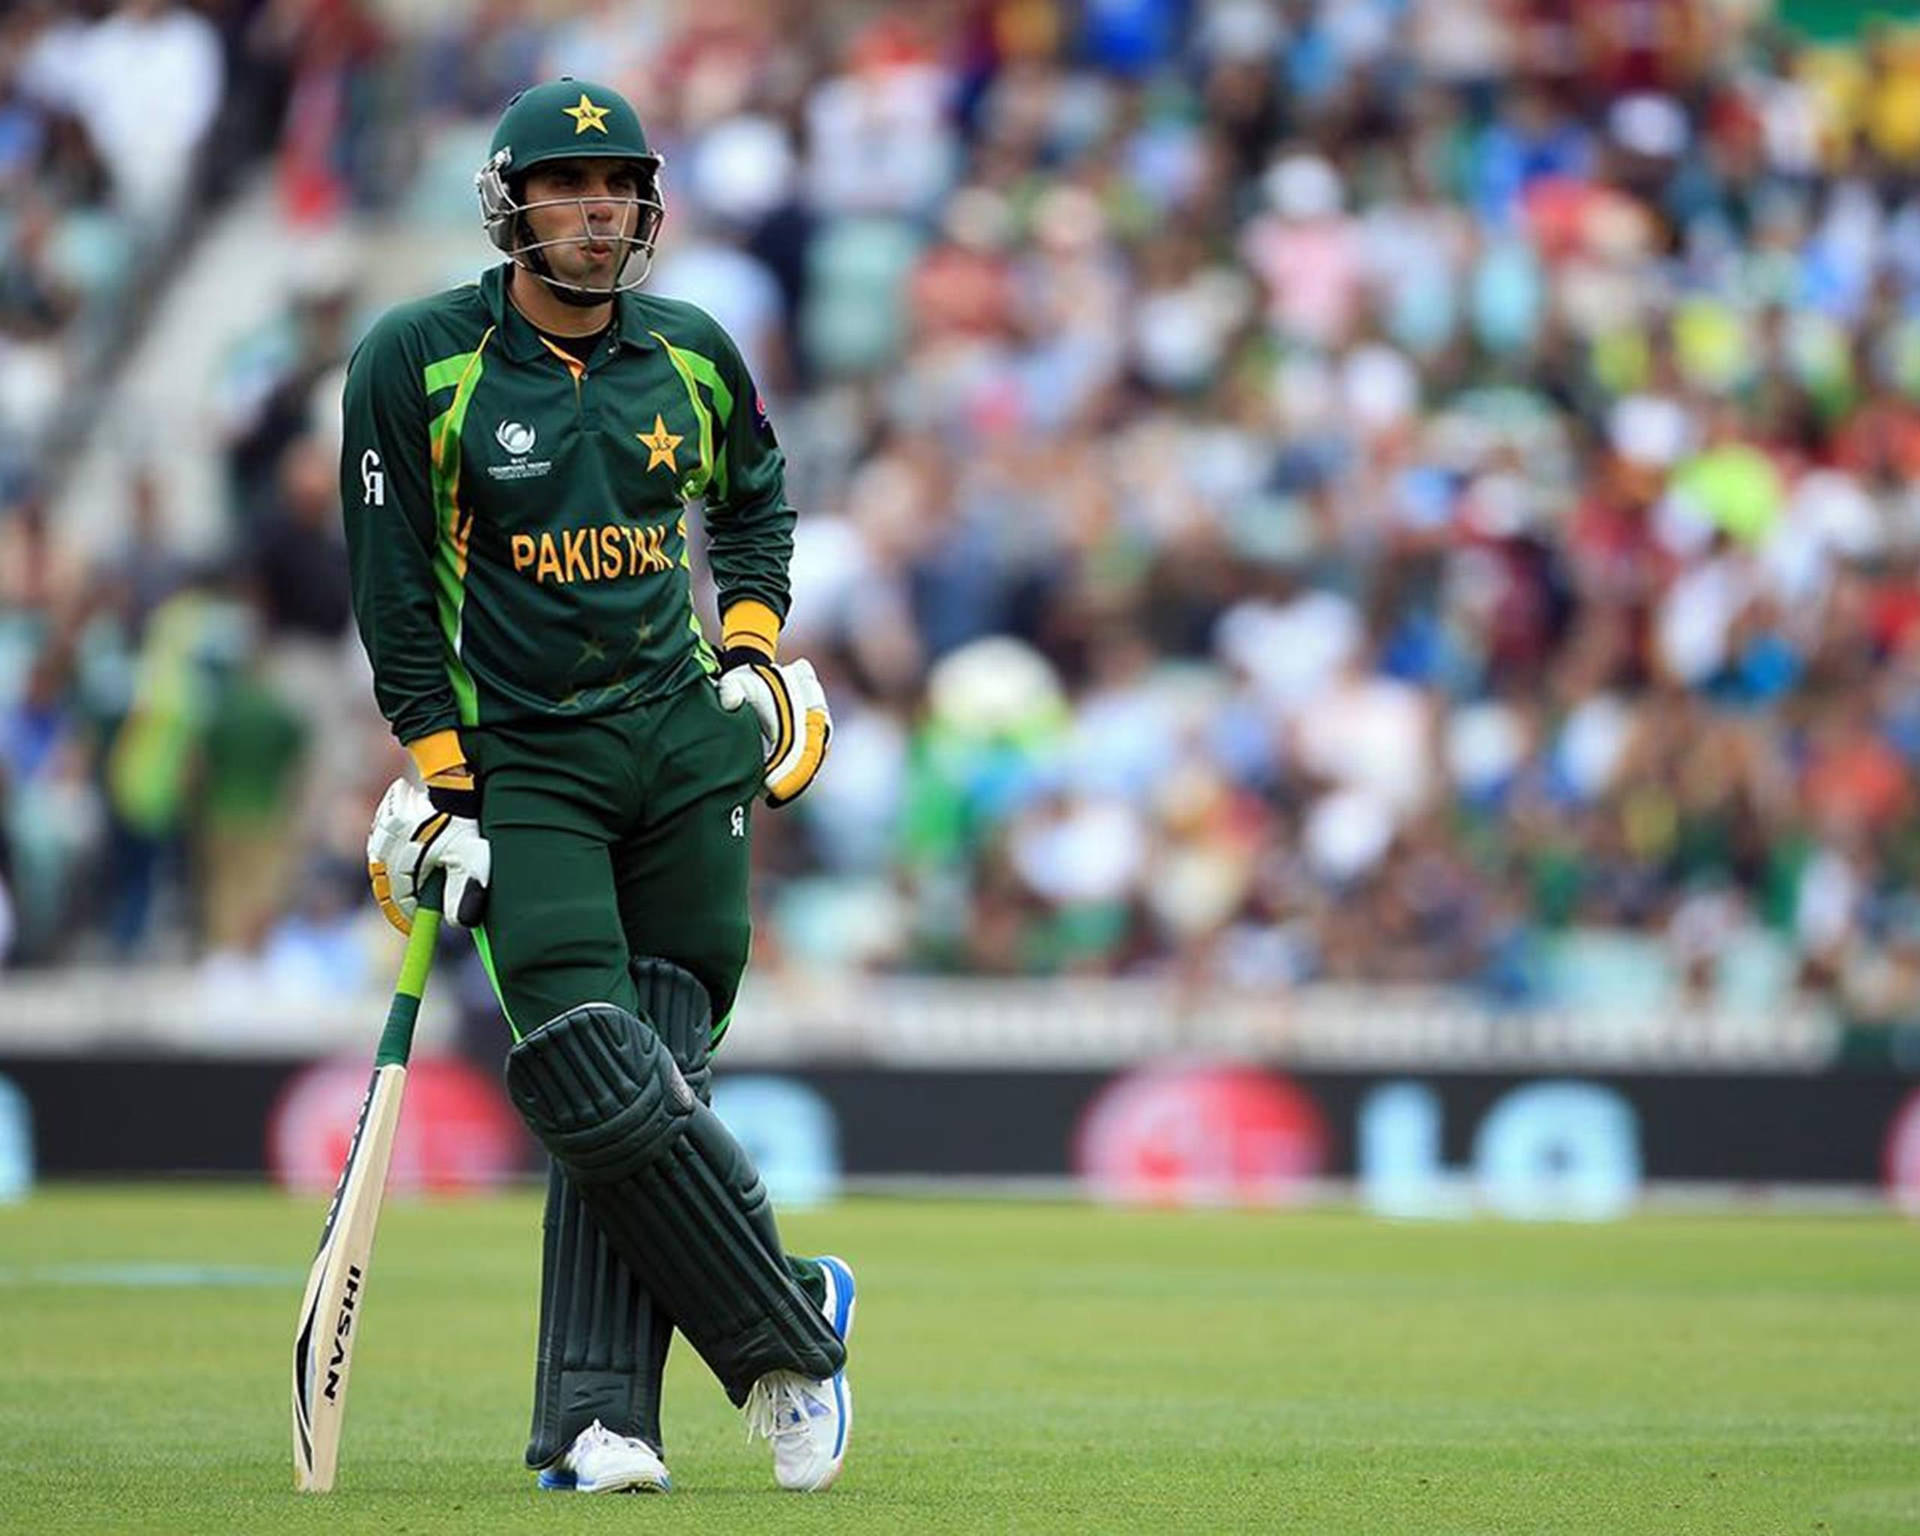 Caption: Misbah-ul-haq Of Pakistan Cricket Showing Determination On The Pitch.